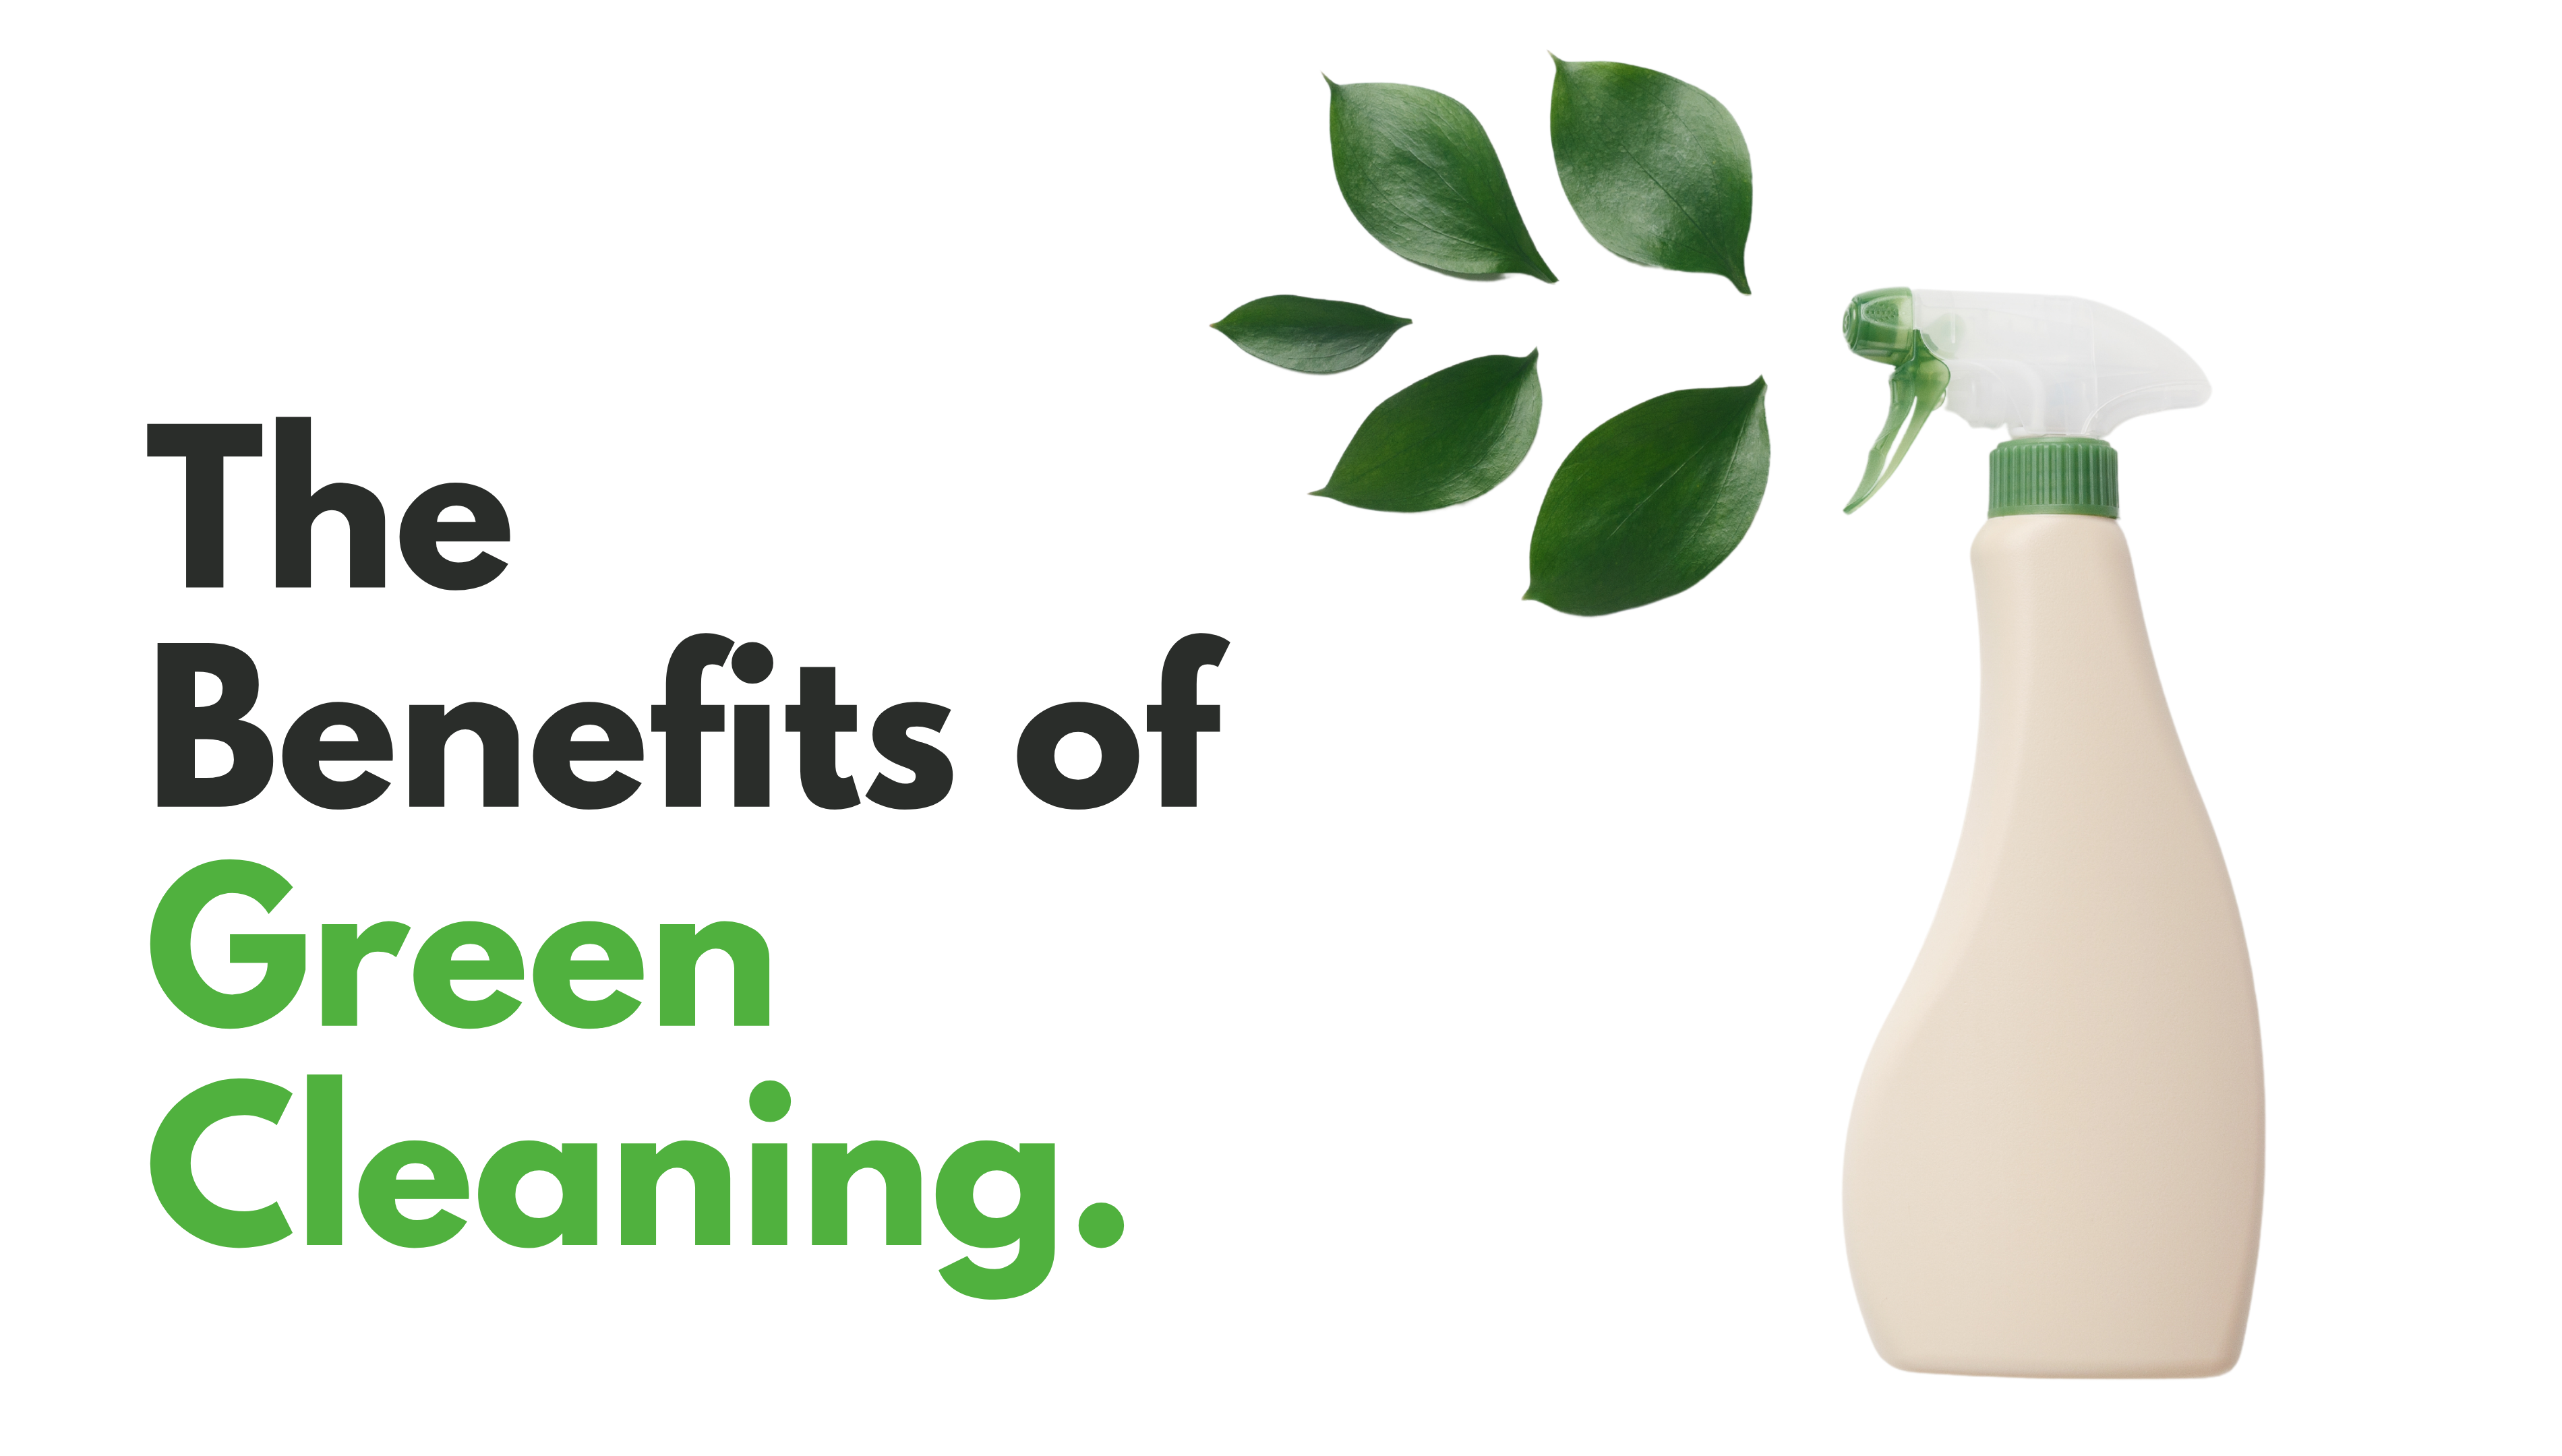 The advantages of green cleaning and what it can do for your facility.